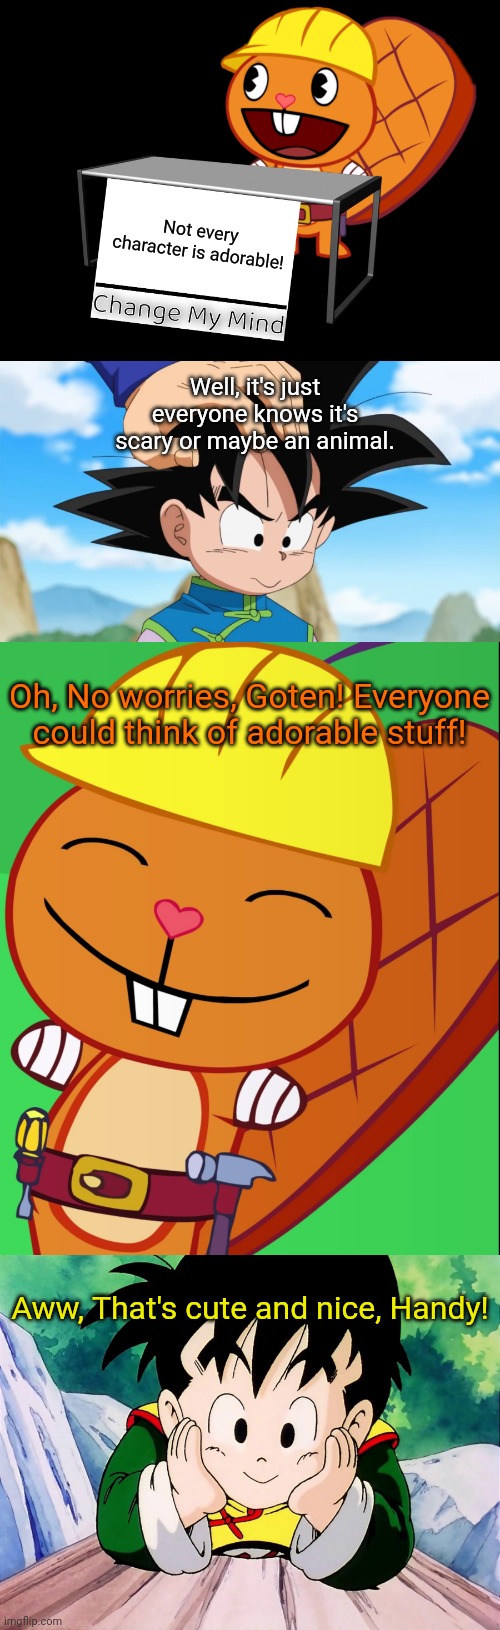 Not every character is adorable! Well, it's just everyone knows it's scary or maybe an animal. Oh, No worries, Goten! Everyone could think of adorable stuff! Aww, That's cute and nice, Handy! | image tagged in happy handy htf,cute gohan dbz,handy change my mind htf meme,adorable goten dbs,crossover,memes | made w/ Imgflip meme maker